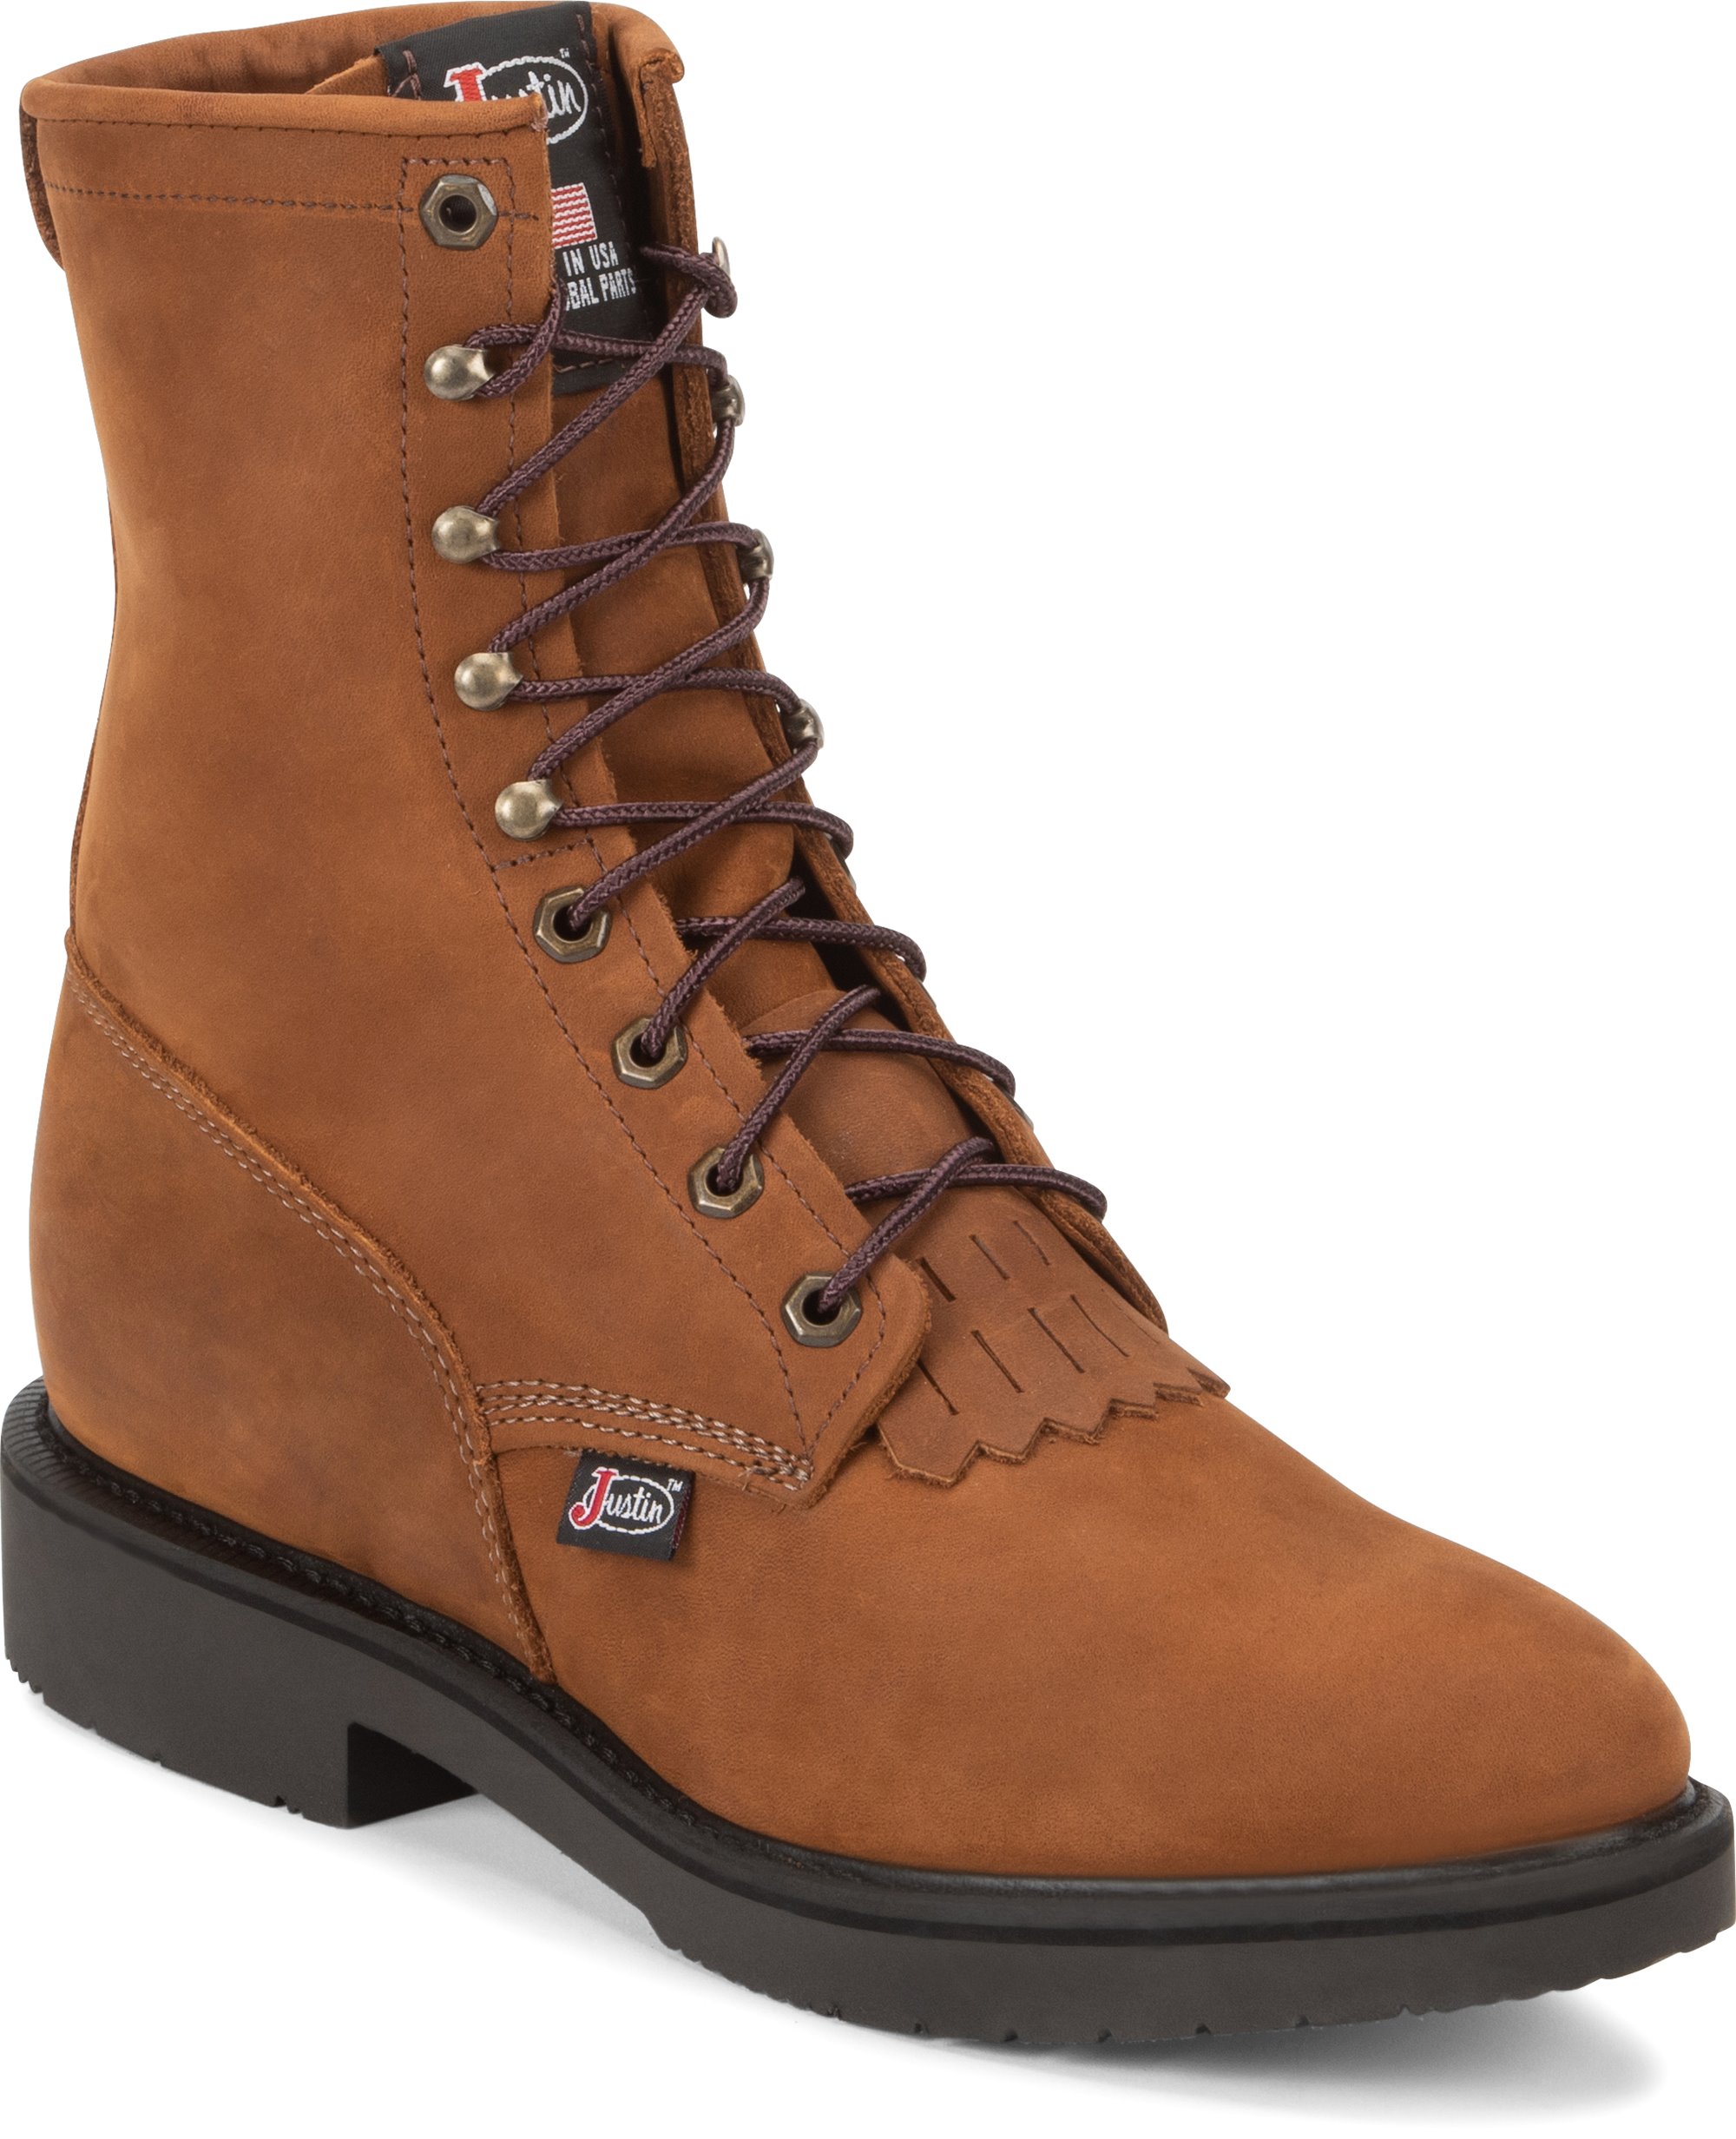 12 inch lace up work boots